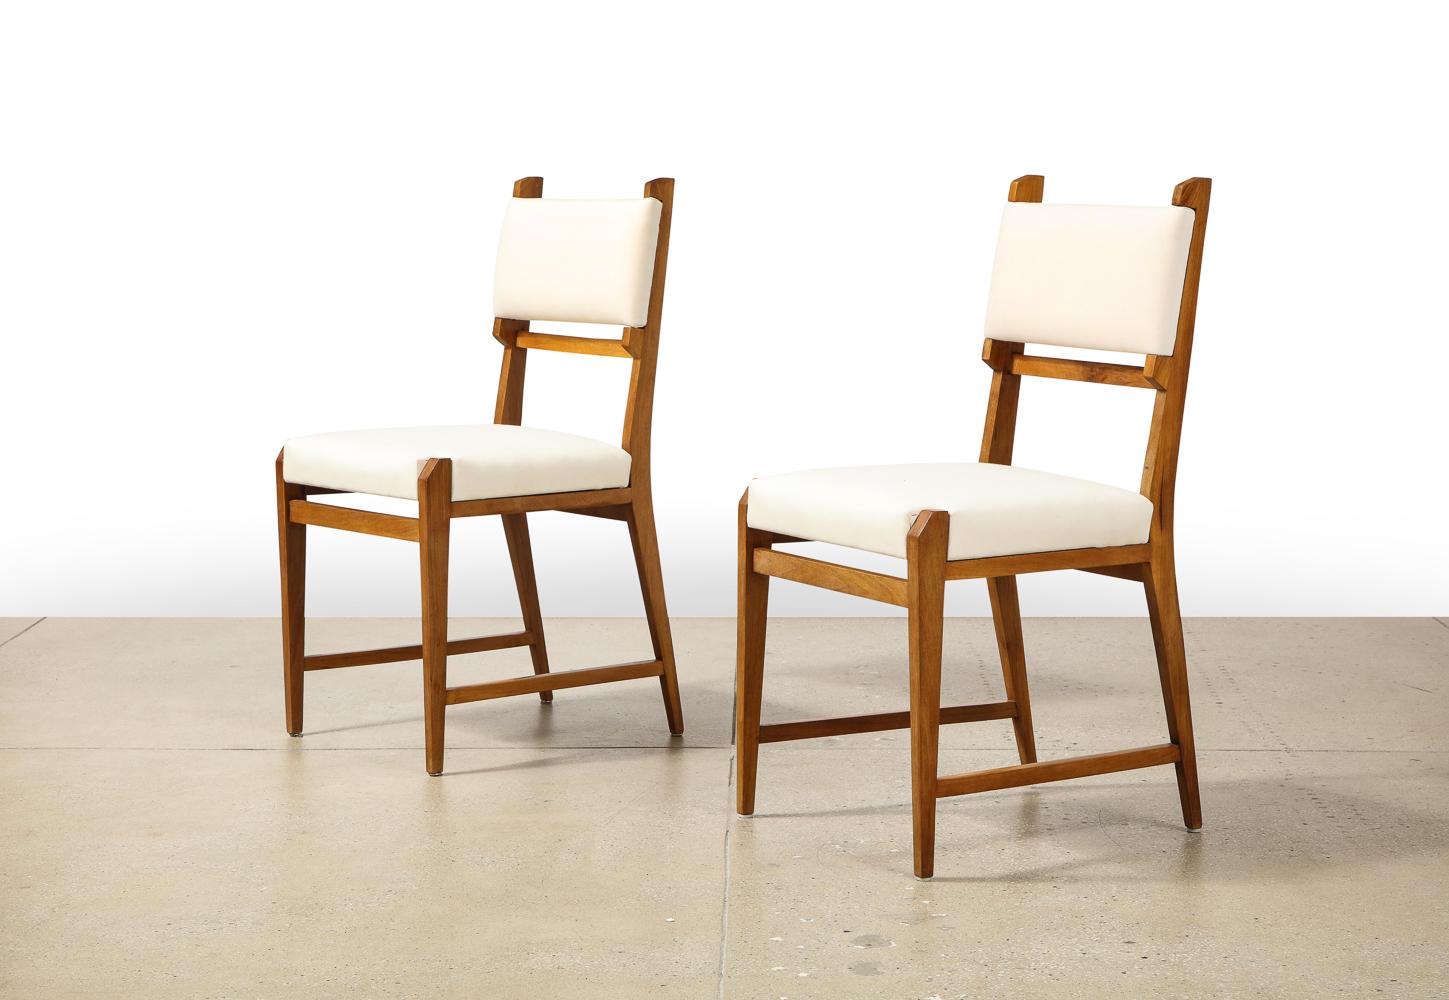 Hand-Crafted Ico Parisi Dining Chairs